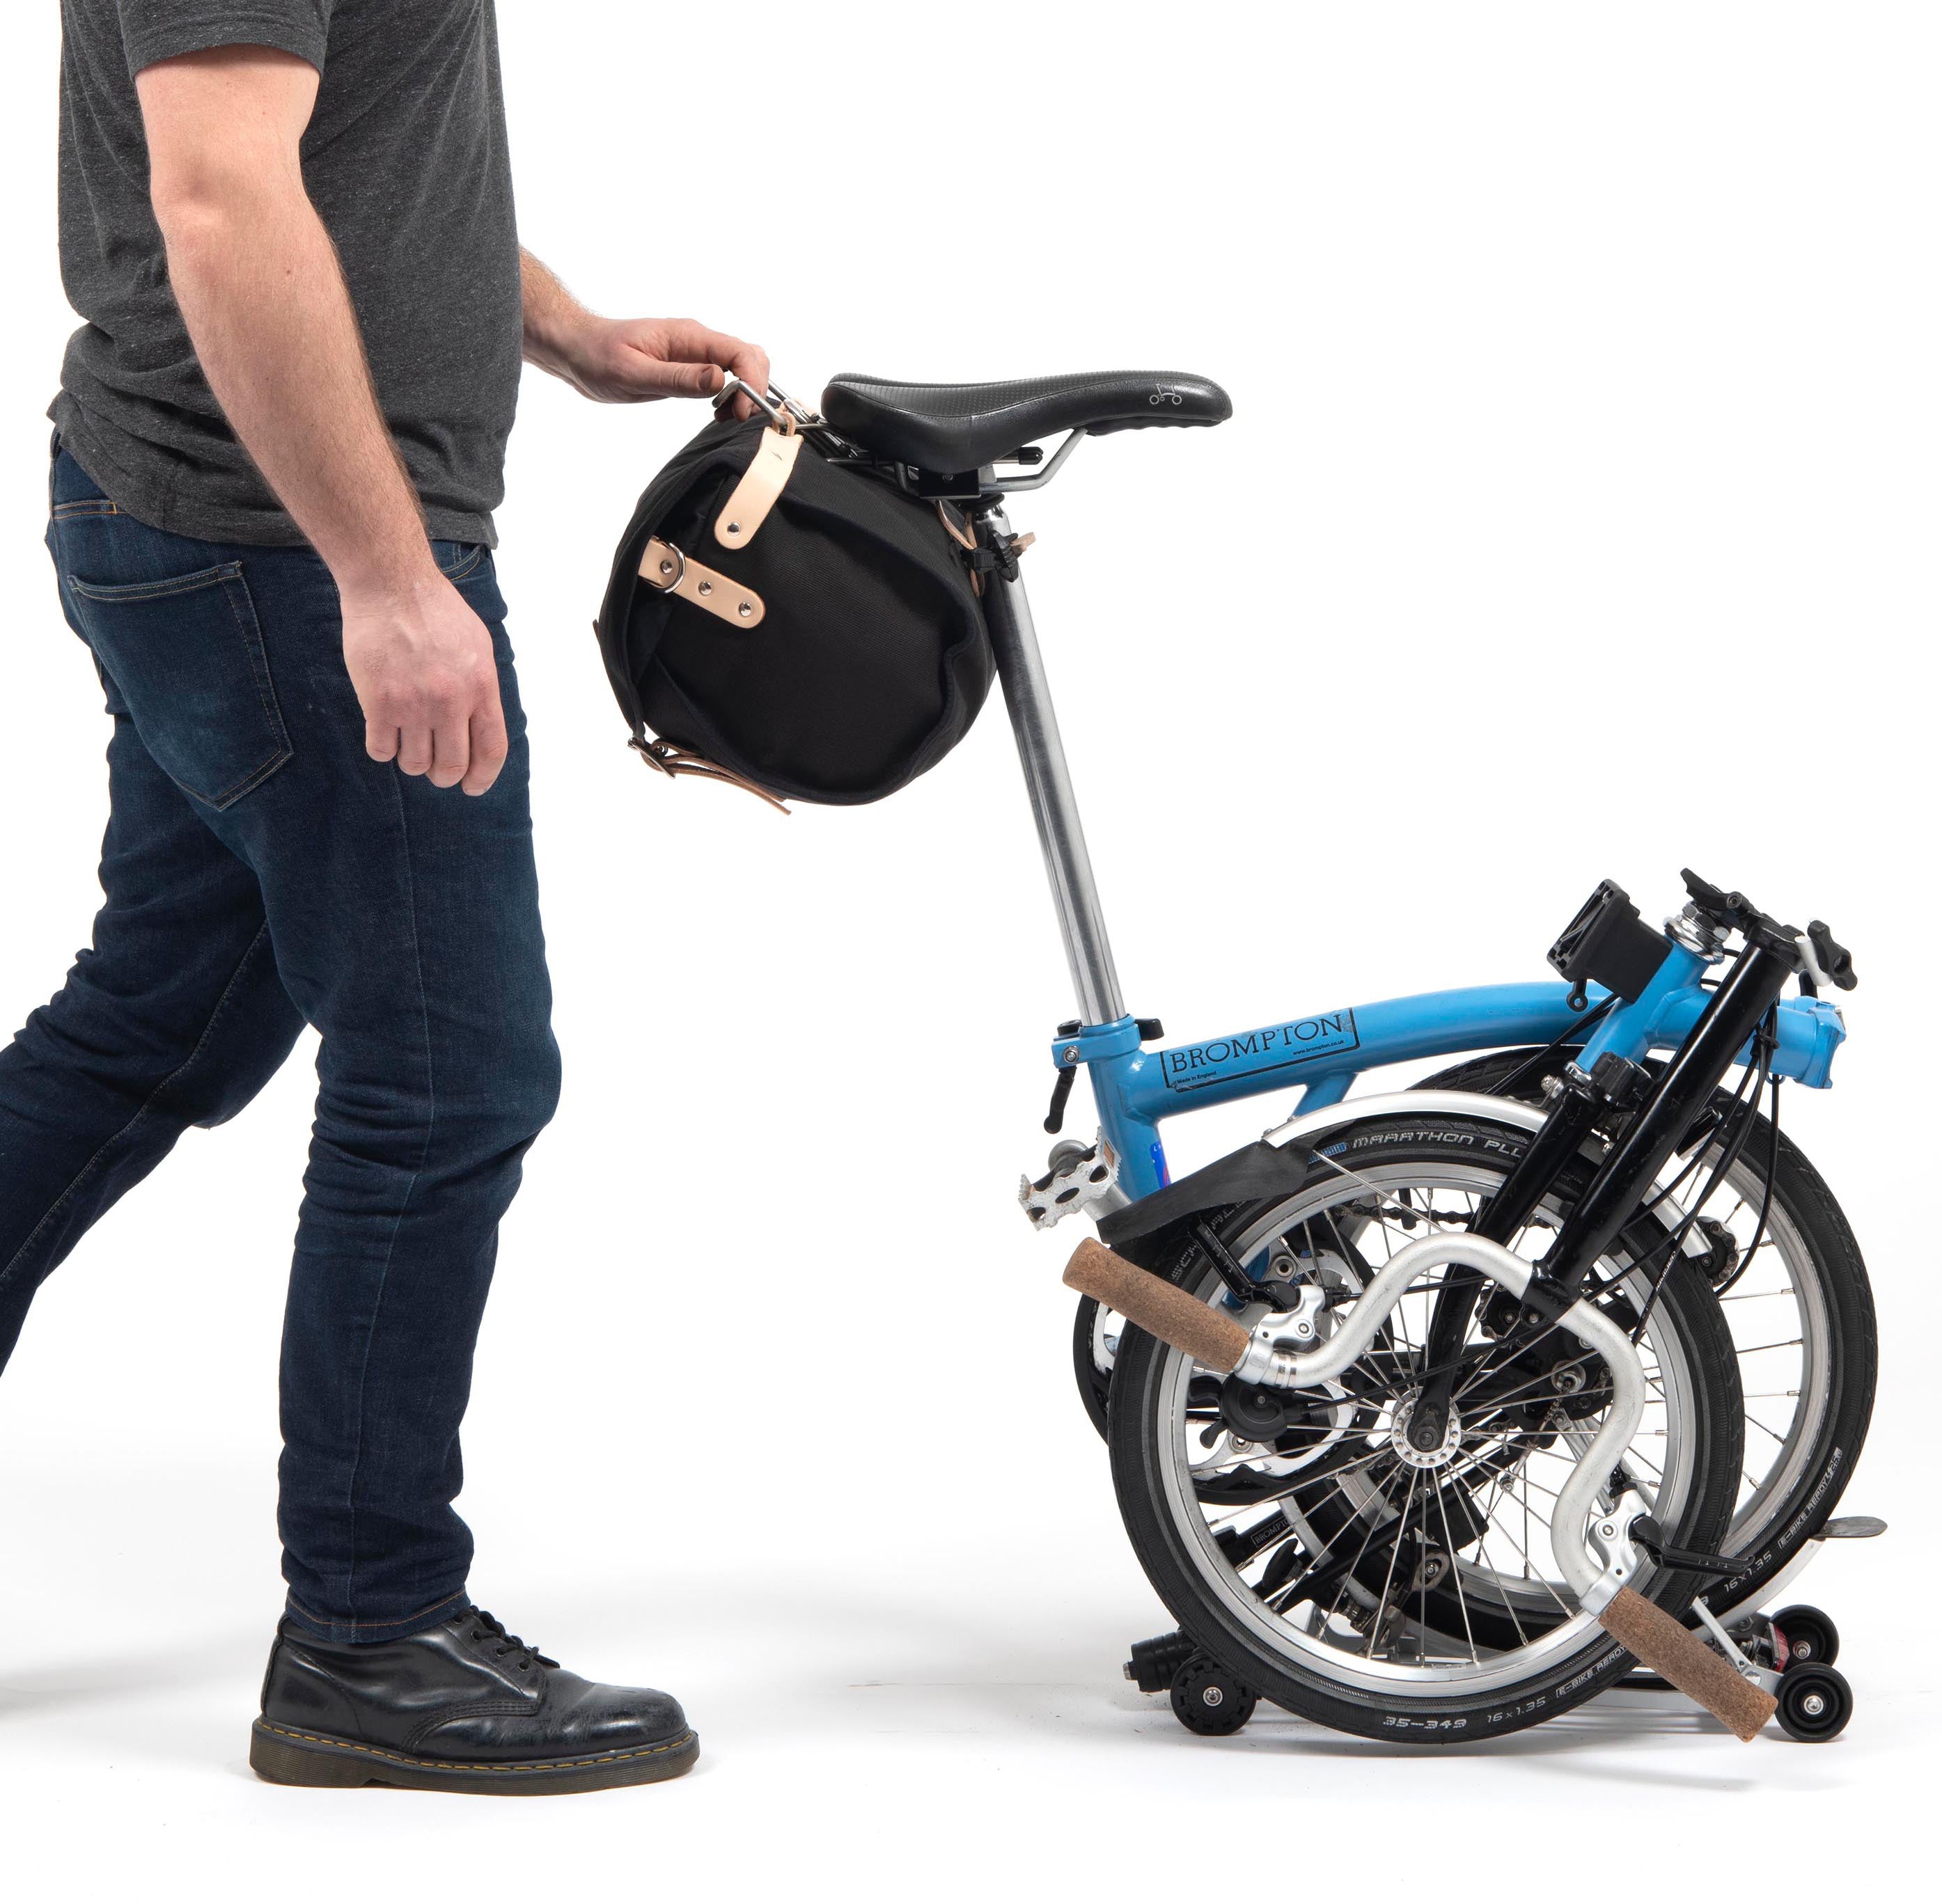 Frost and Sekers Otis saddle bag and quick-release micro rack for Brompton bikes.